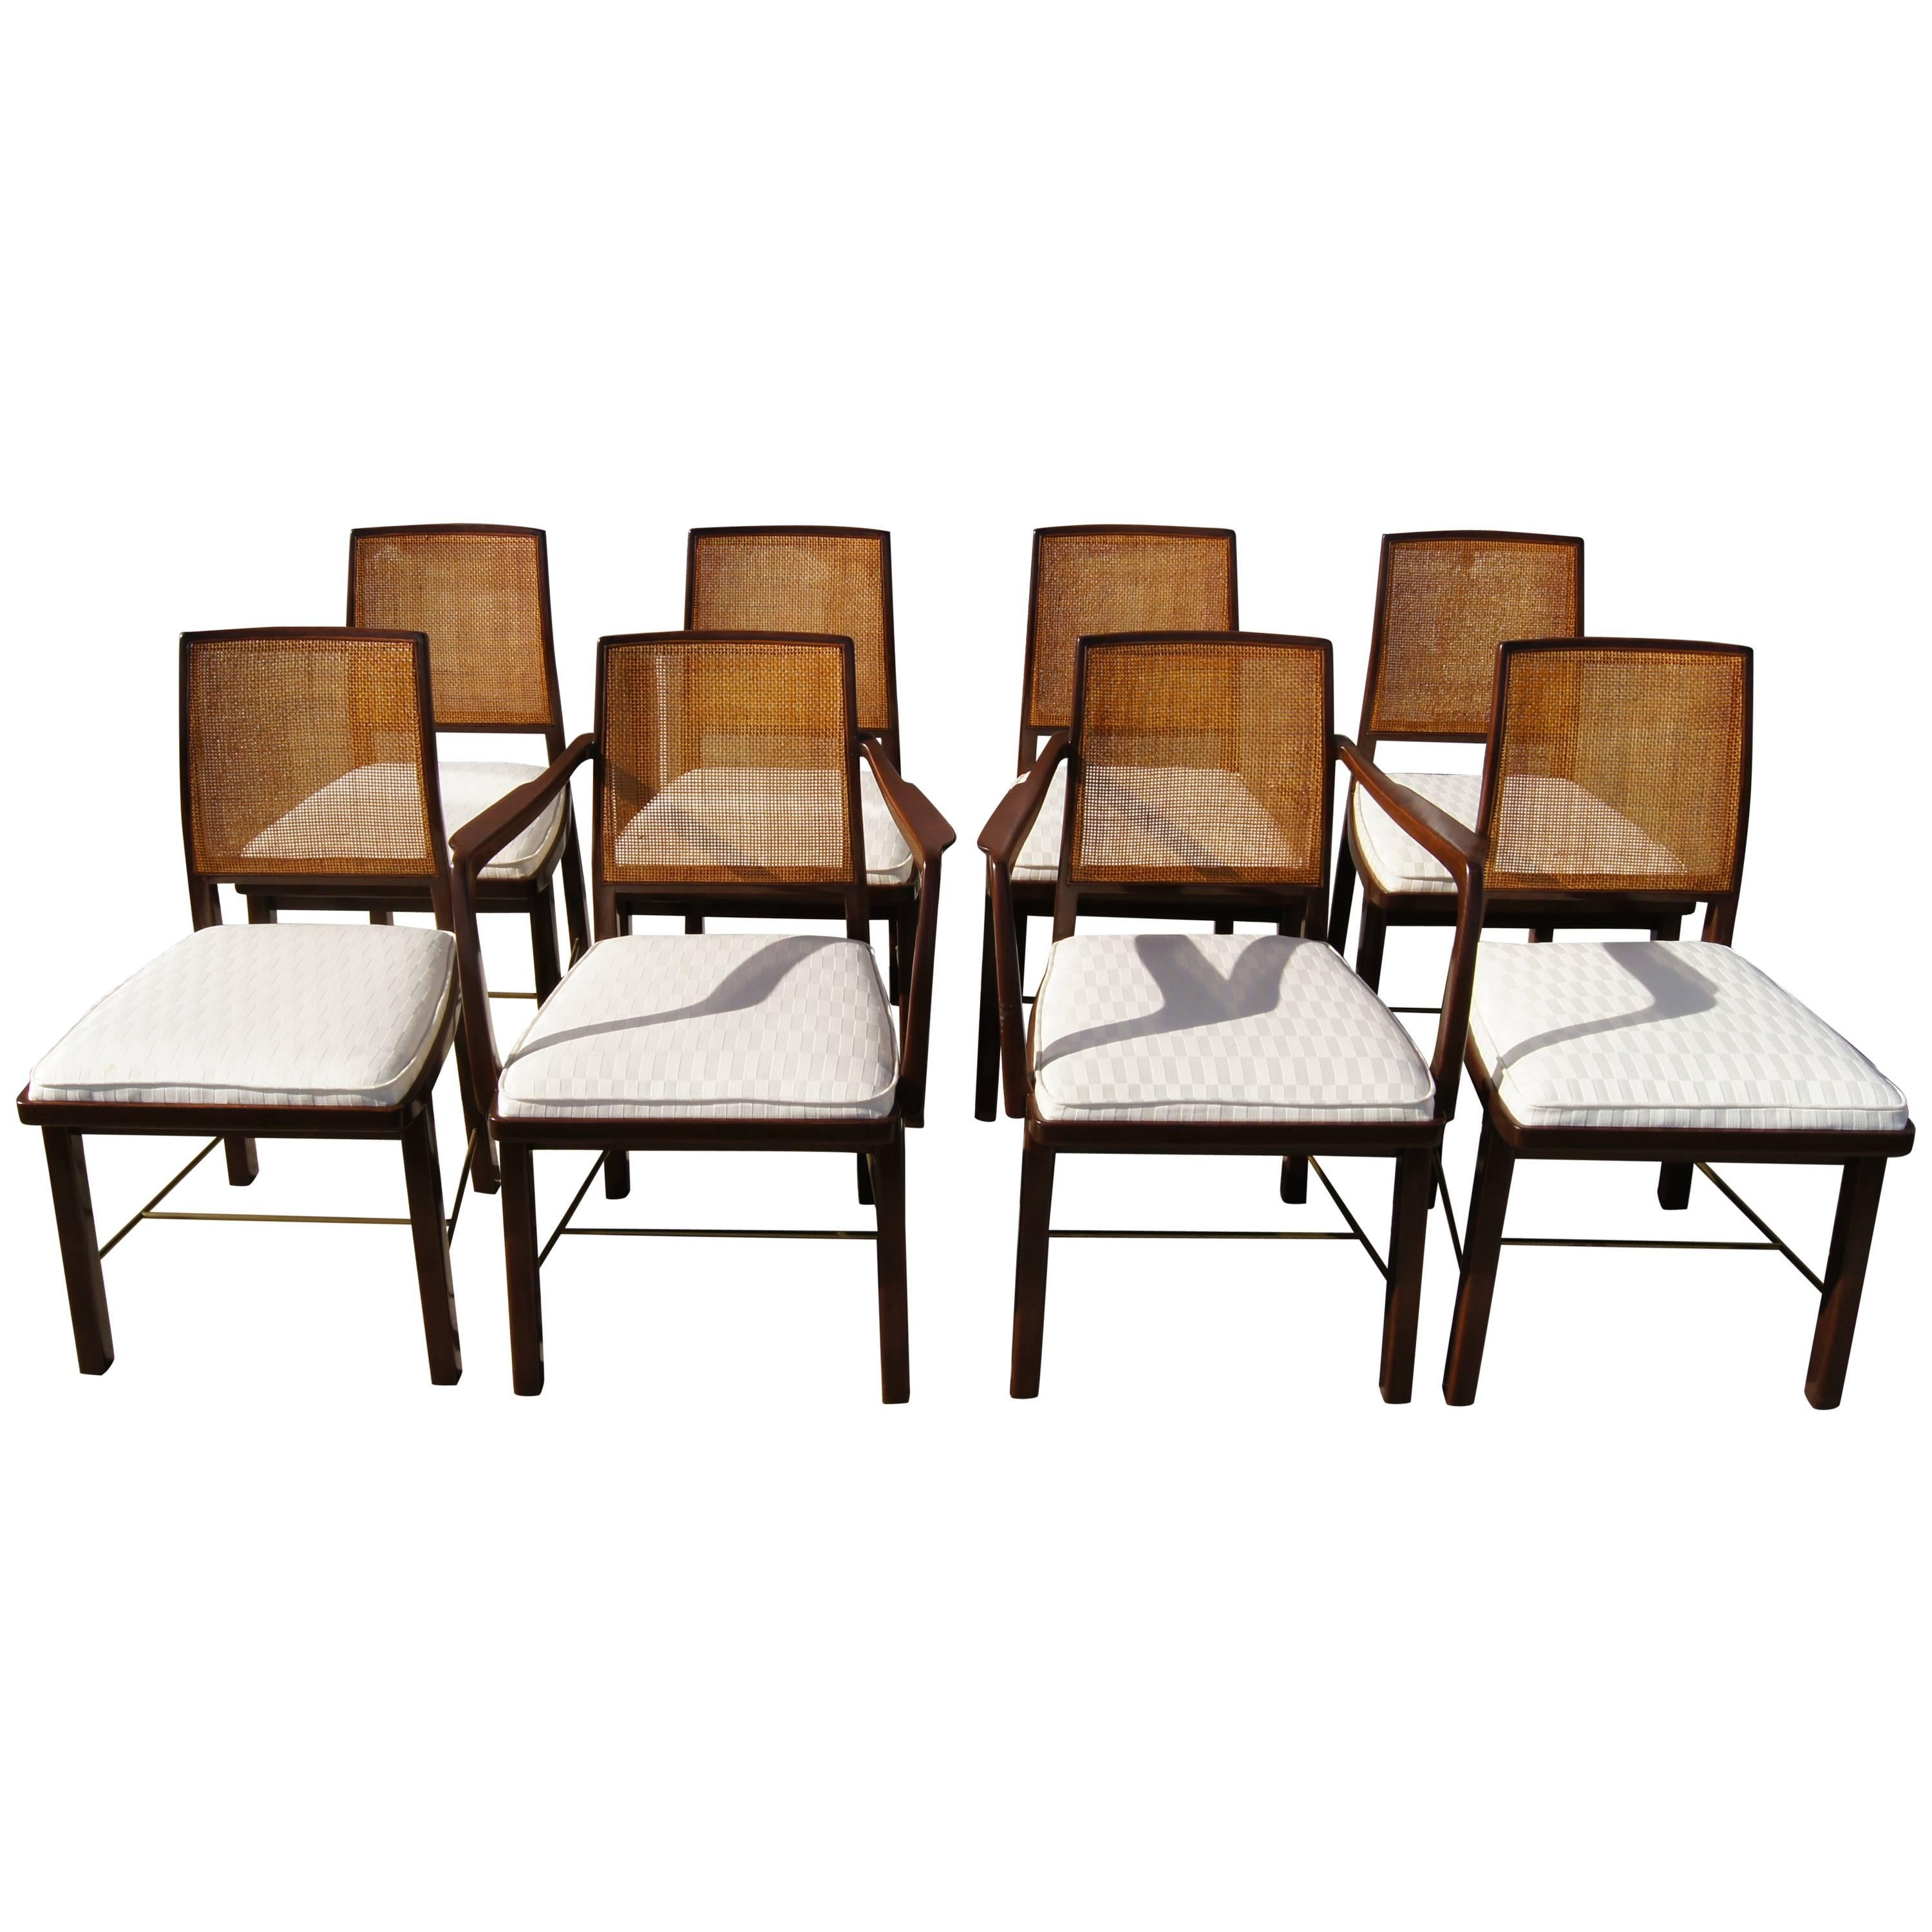 Set of Eight Janus Collection Dining Chairs by Edward Wormley for Dunbar